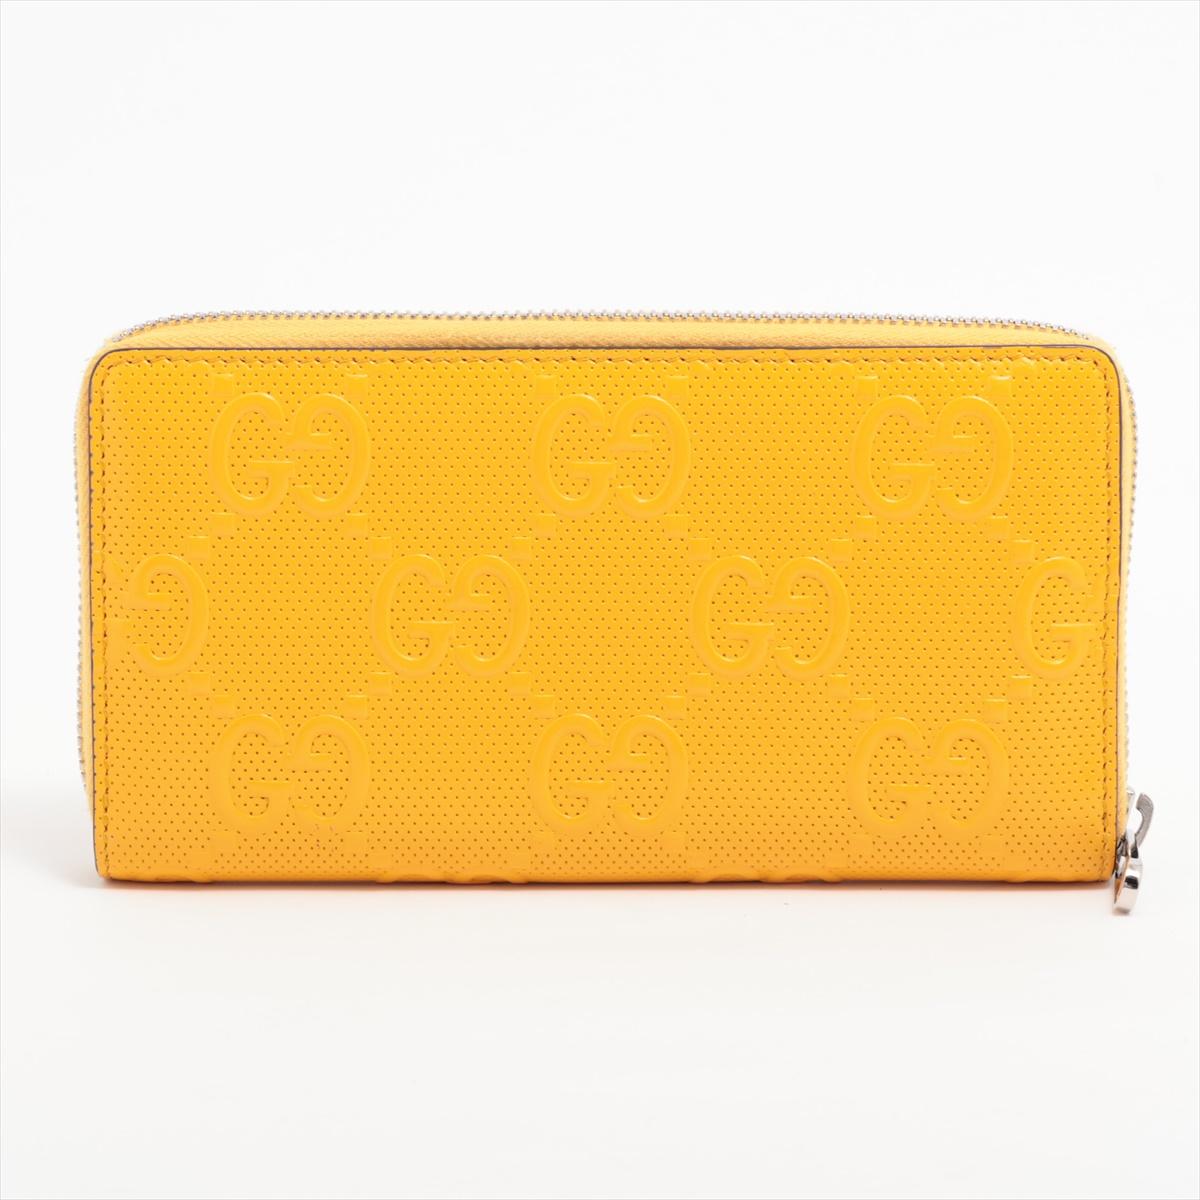 Gucci GG Embossed Leather Zip Long Wallet Yellow In Good Condition For Sale In Indianapolis, IN